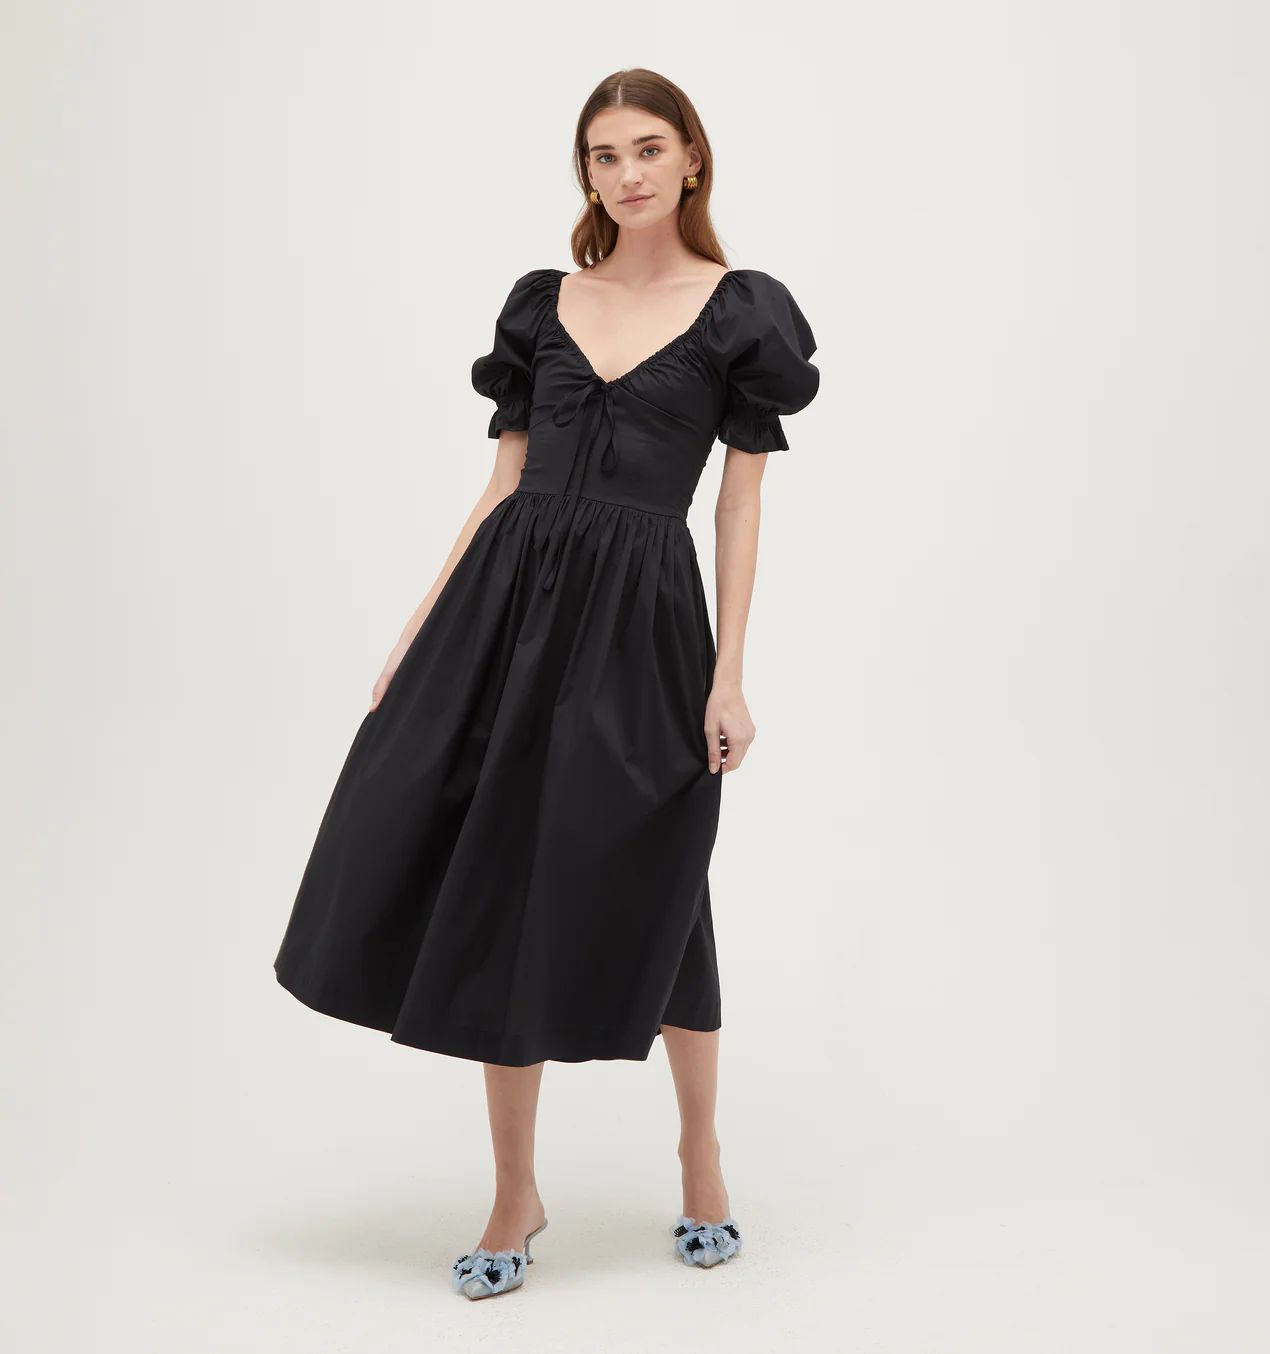 The Ophelia Dress - Black Cotton Voile | Hill House Home